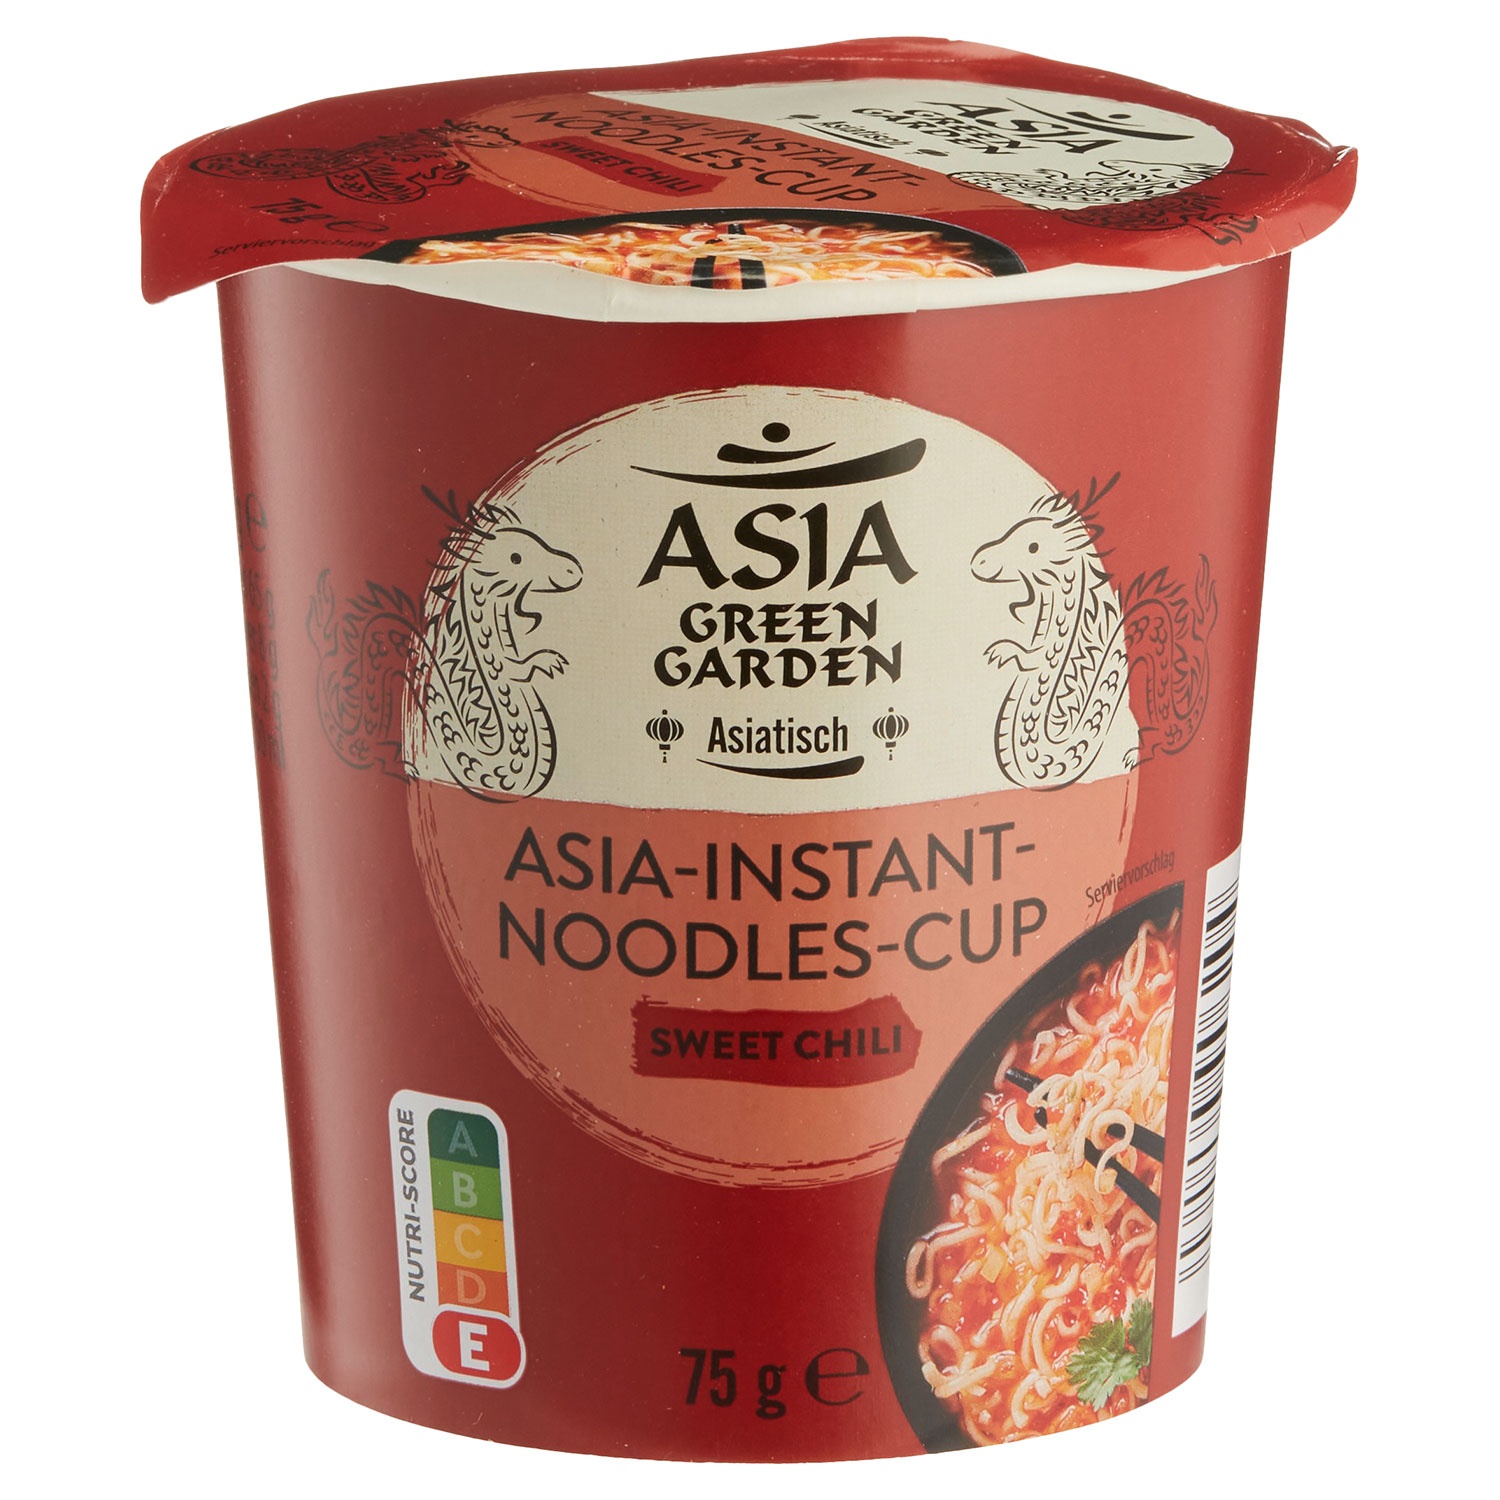 ASIA GREEN GARDEN Asia-Instant-Noodles-Cup 75 g